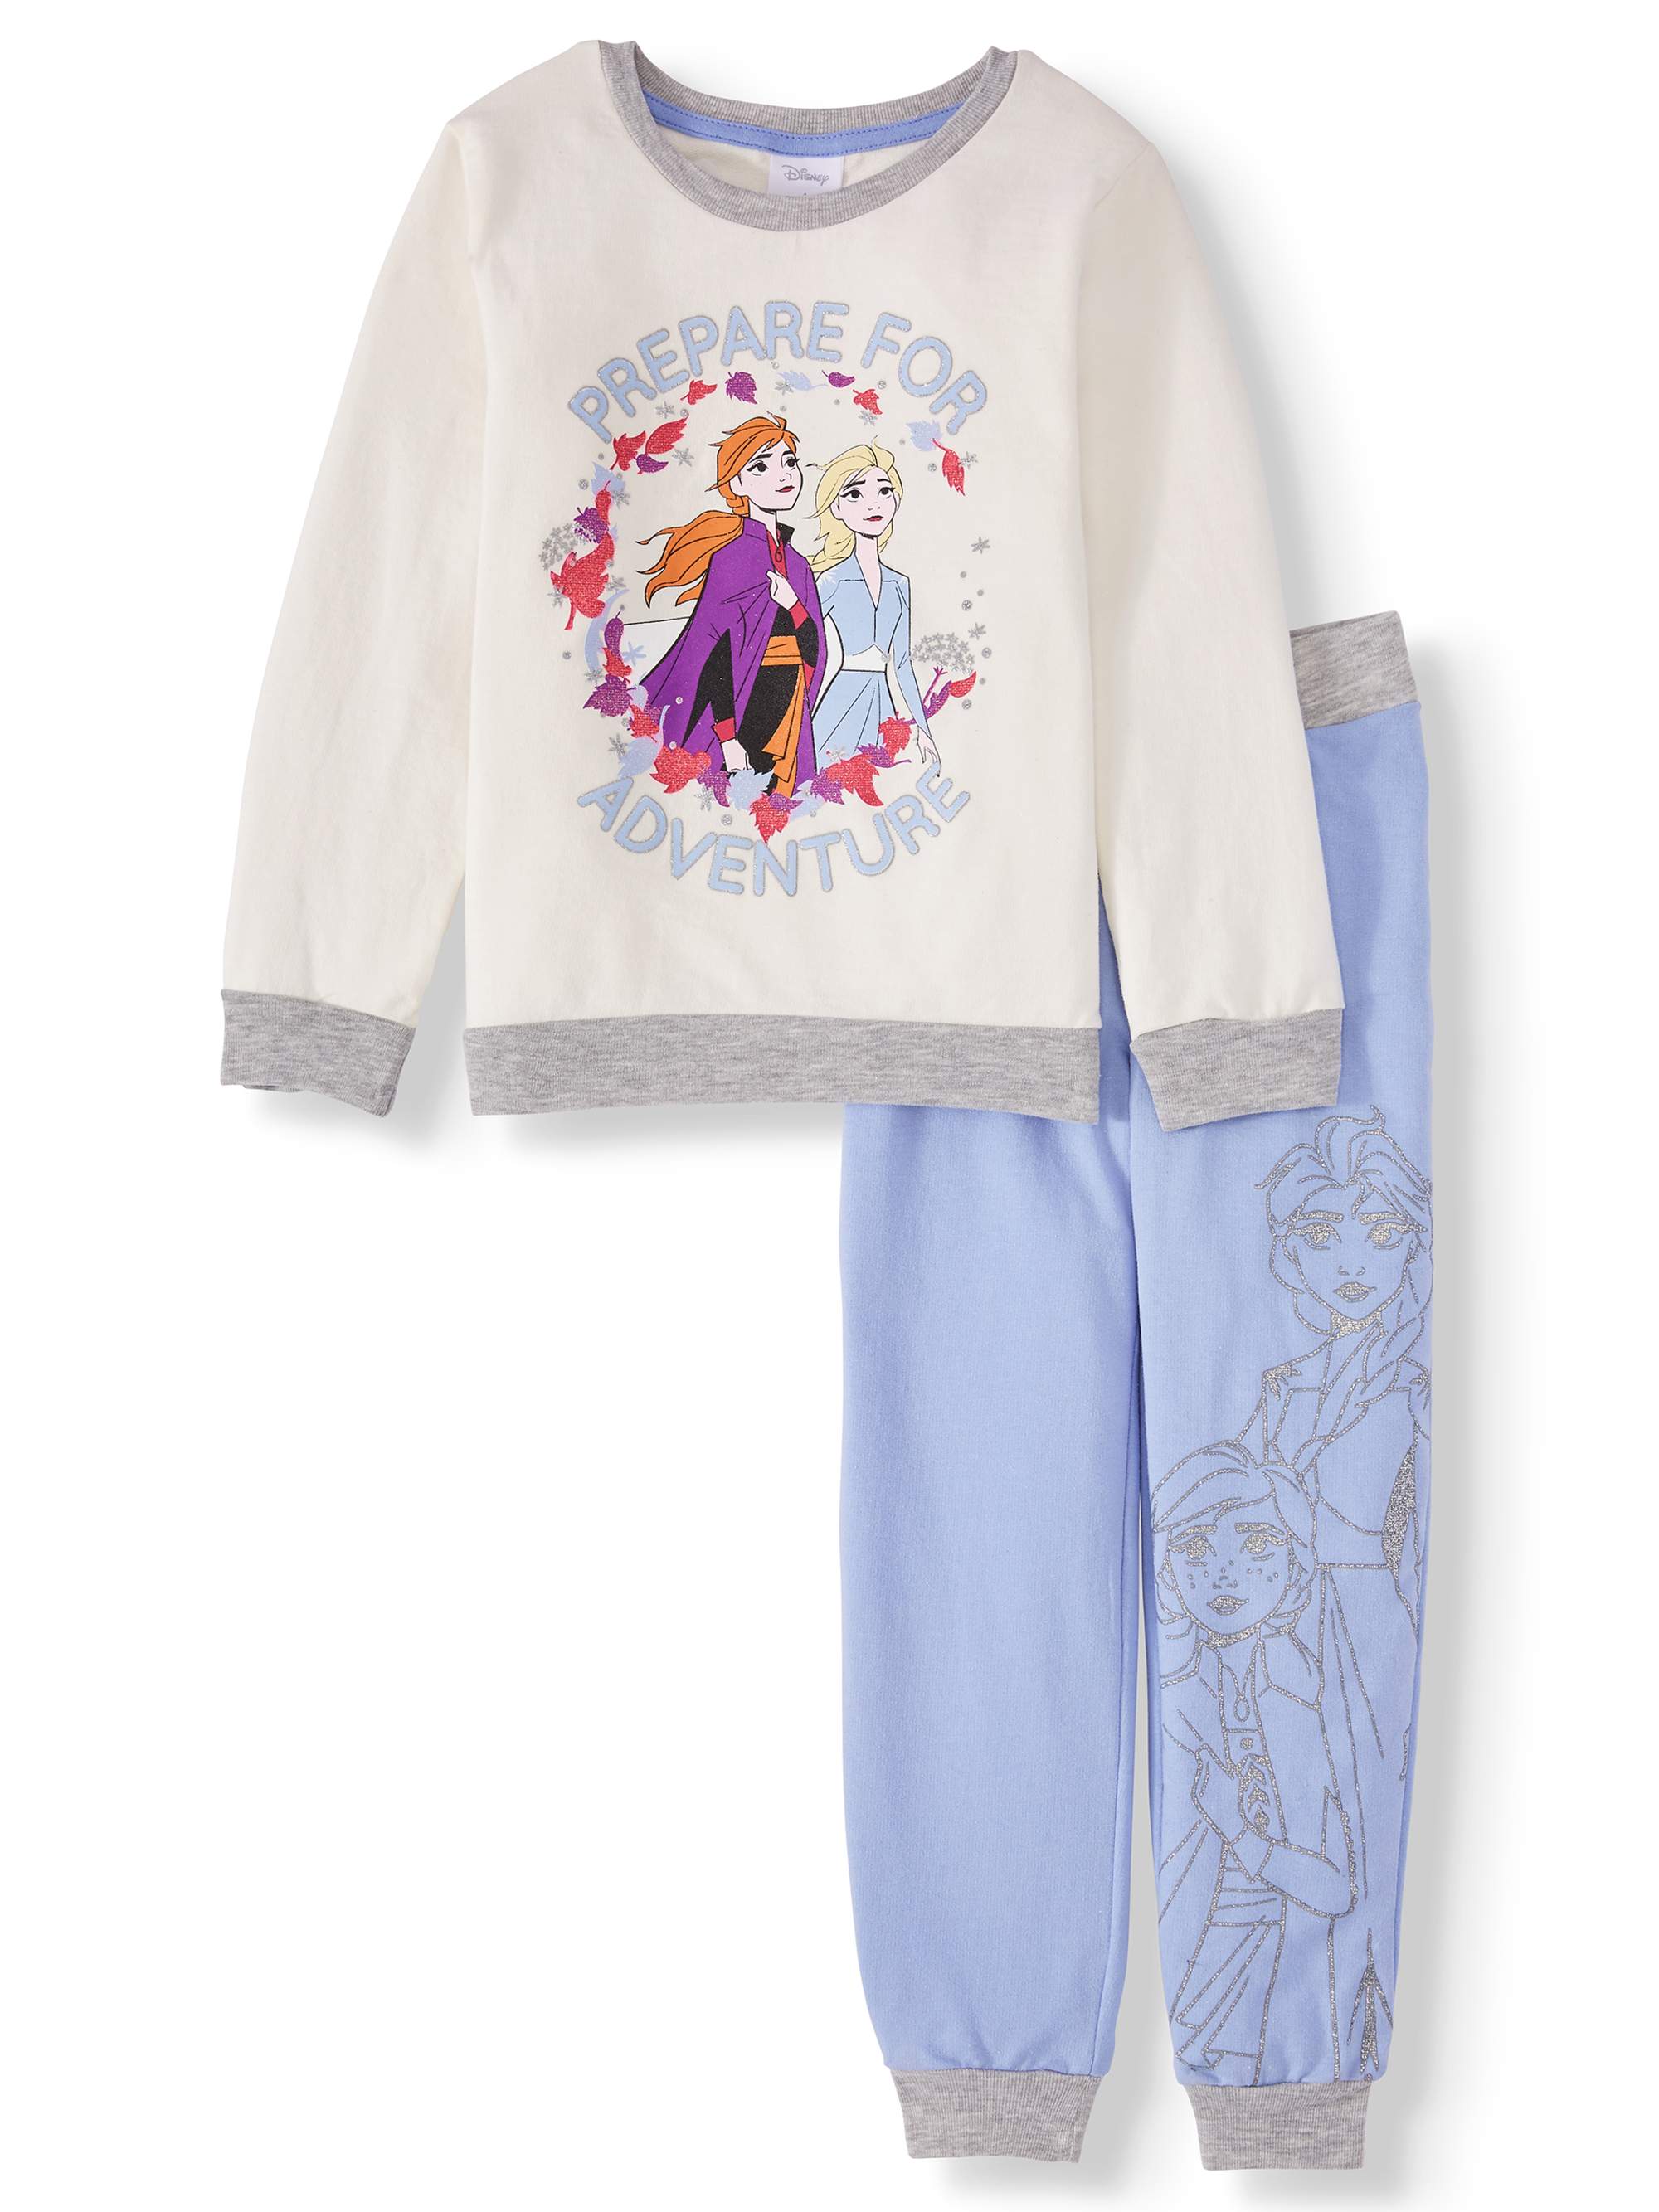 Disney Frozen 2 Graphic French Terry Sweatshirt and Joggers, 2-Piece Outfit Set (Little Girls & Big Girls) - image 1 of 2